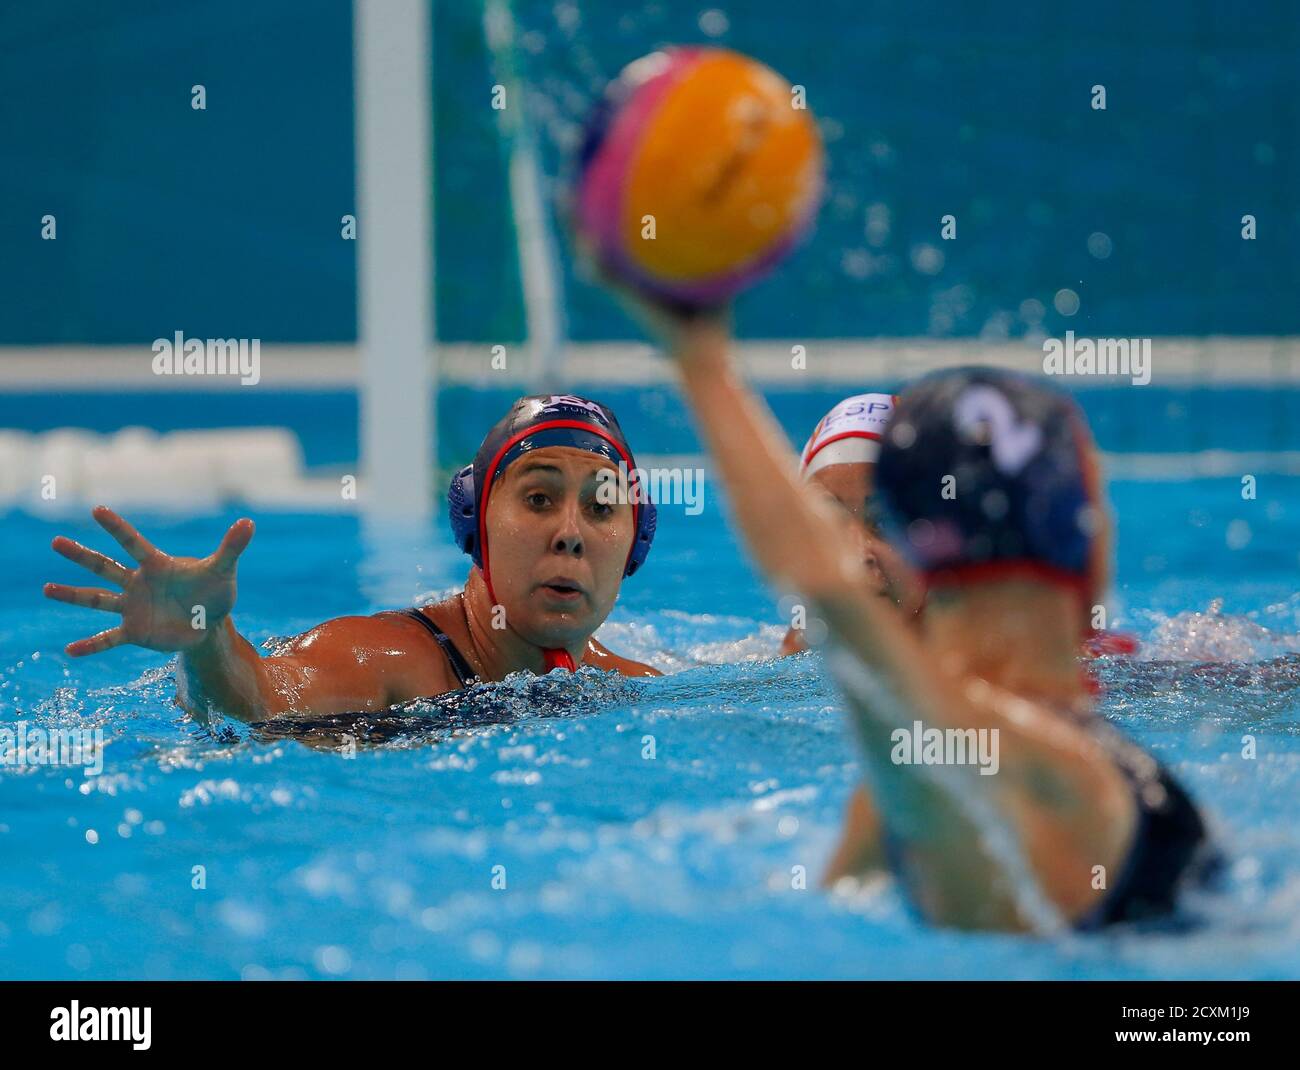 Courtney Mathewson (L) of the U.S. looks to receive a pass from her  teammate Heather Petri during their women's preliminary round Group A water  polo match against Spain at the London 2012